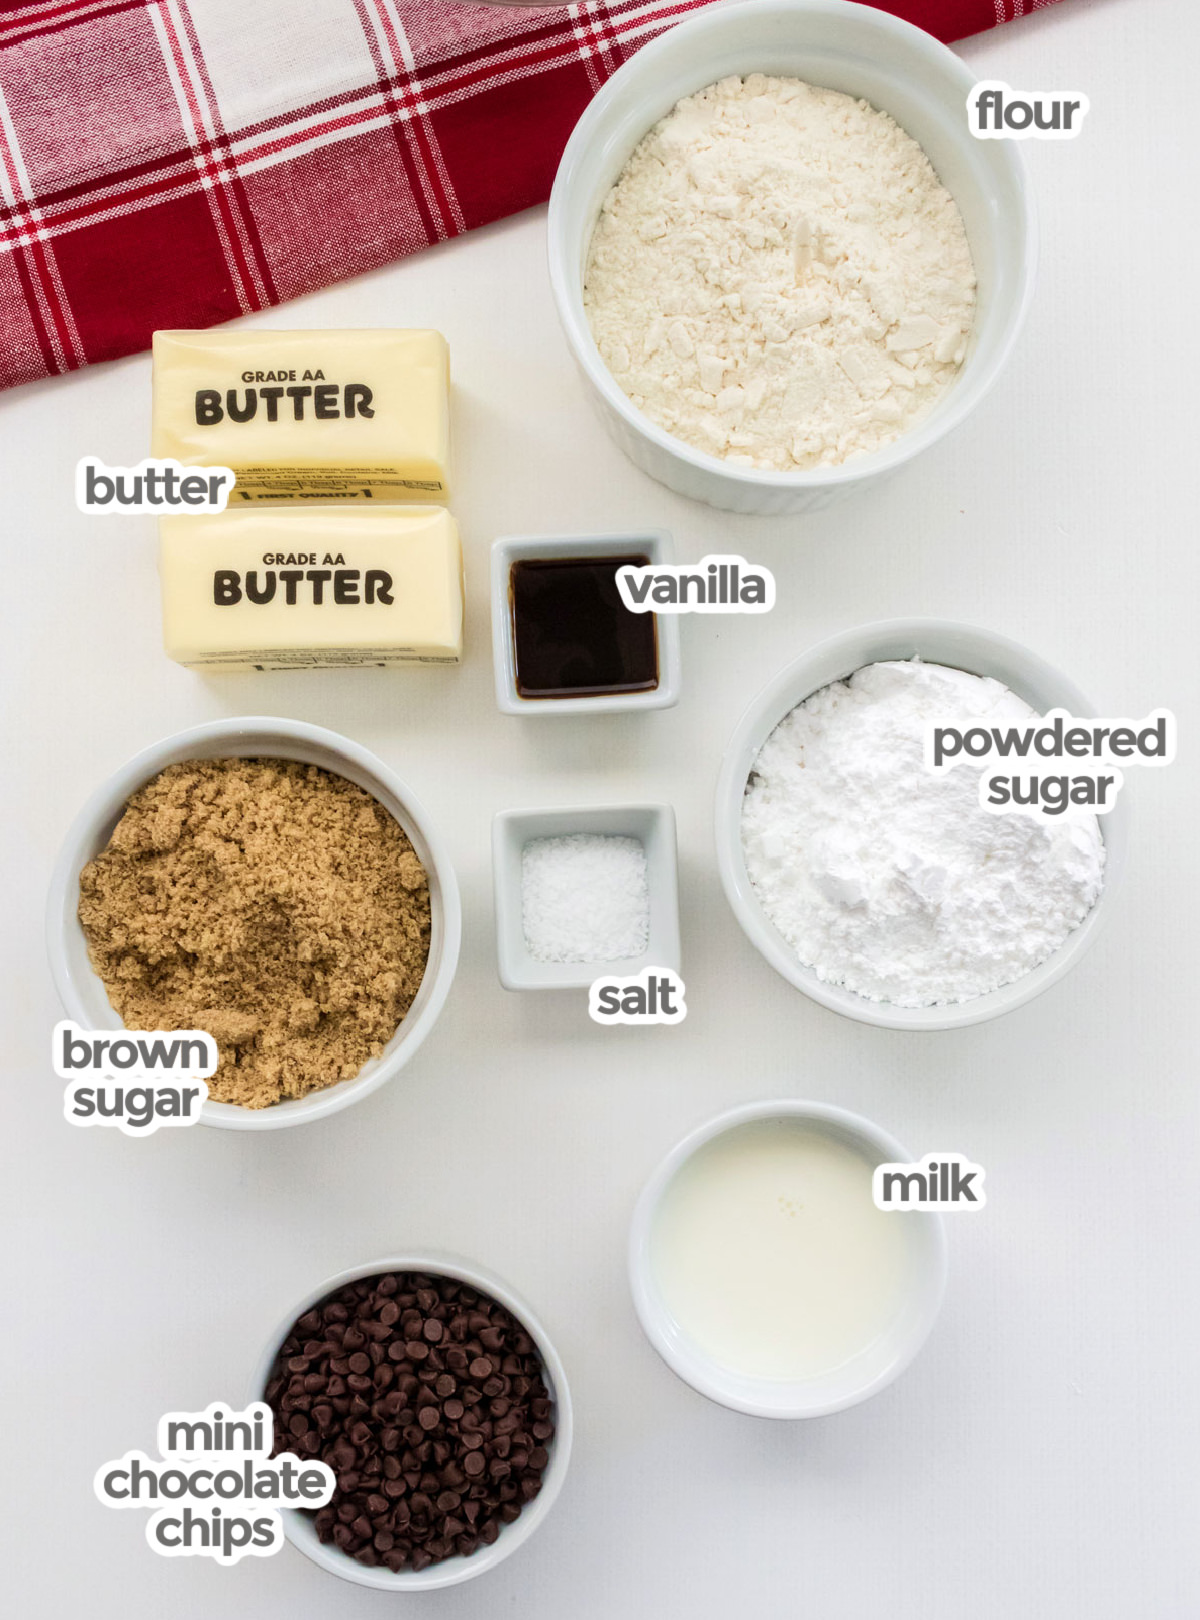 All the ingredients you will need to make Edible Cookie Dough including flour, butter, vanilla, powdered sugar, brown sugar, milk and Mini Chocolate Chips.